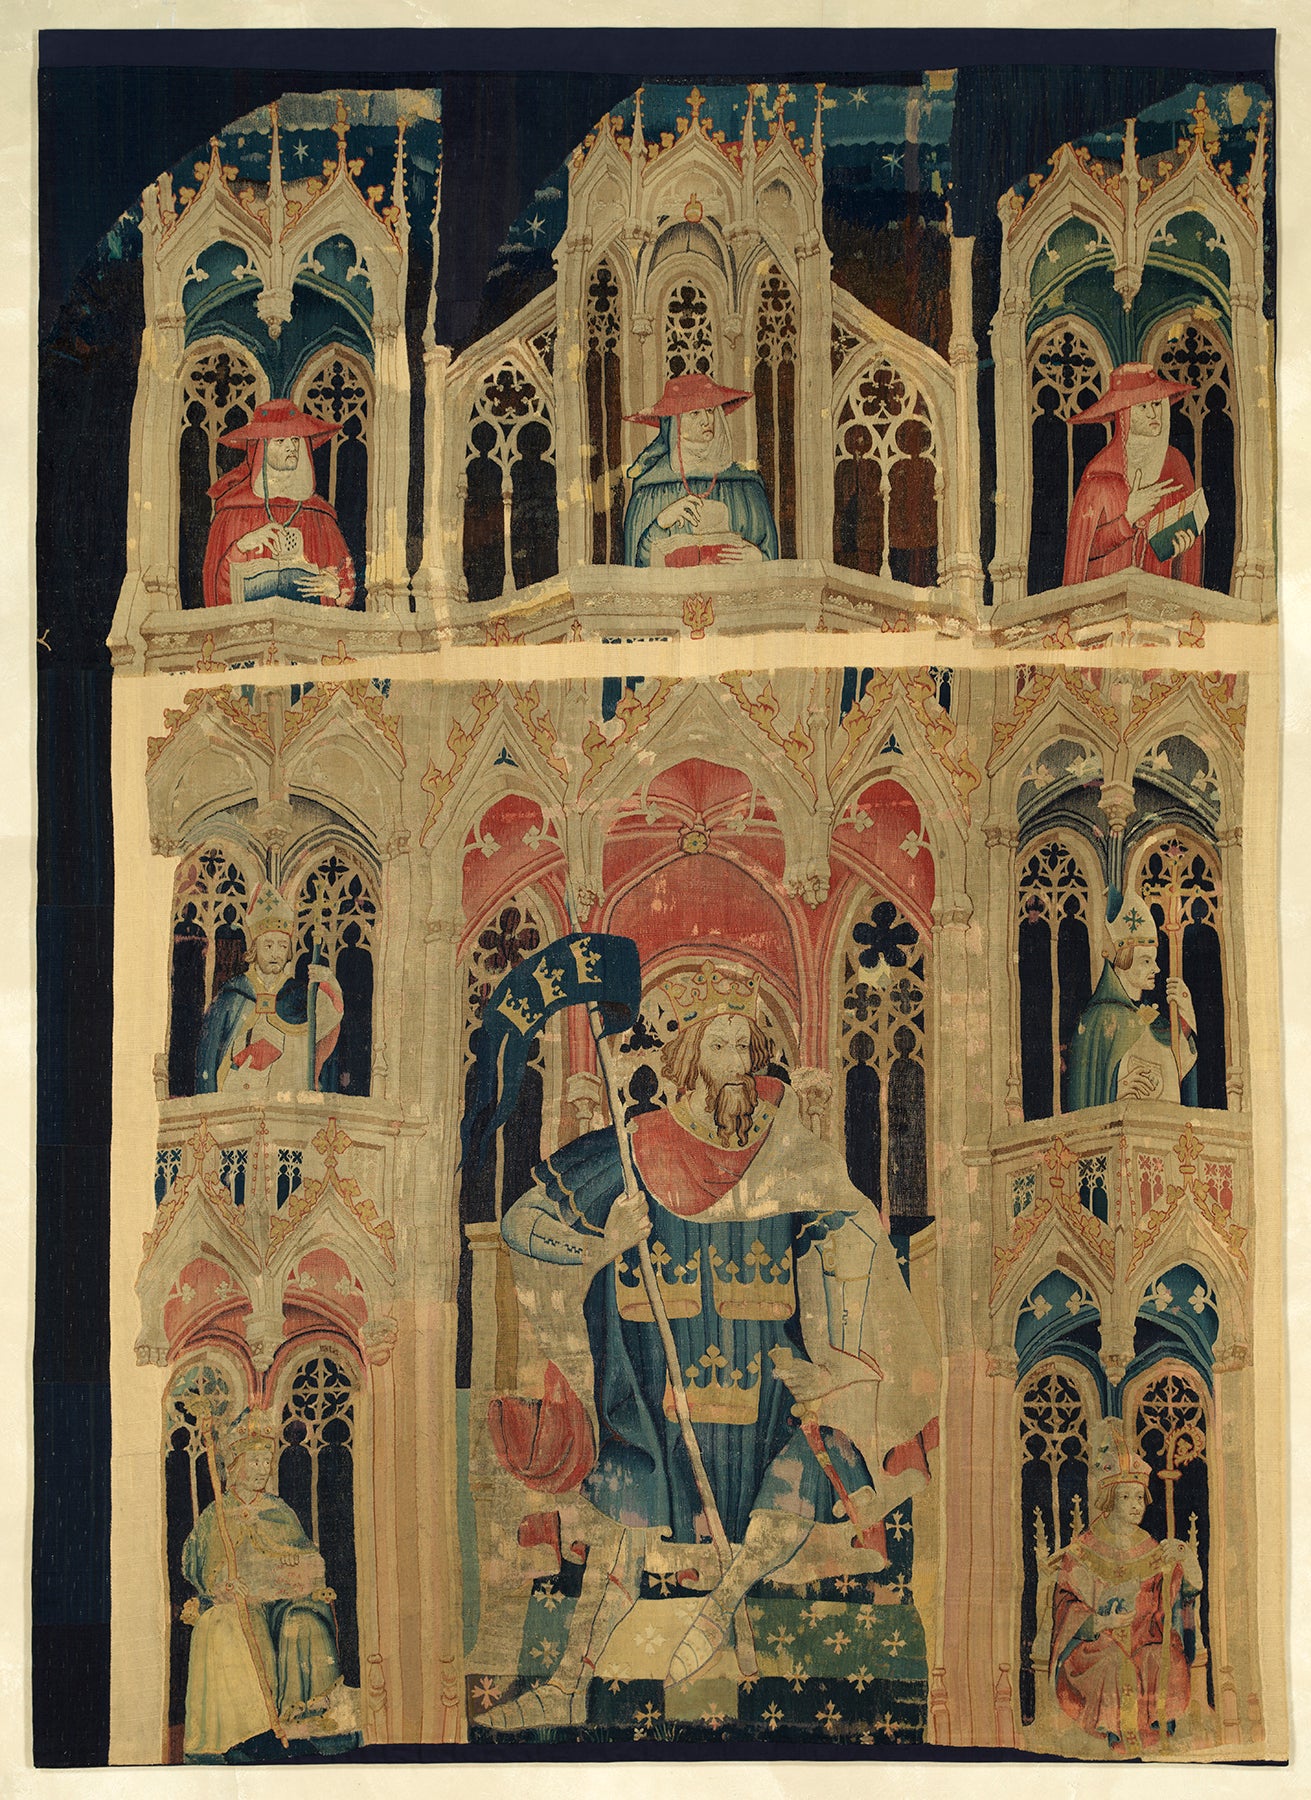 King Arthur (from the Heroes Tapestries) RE260396